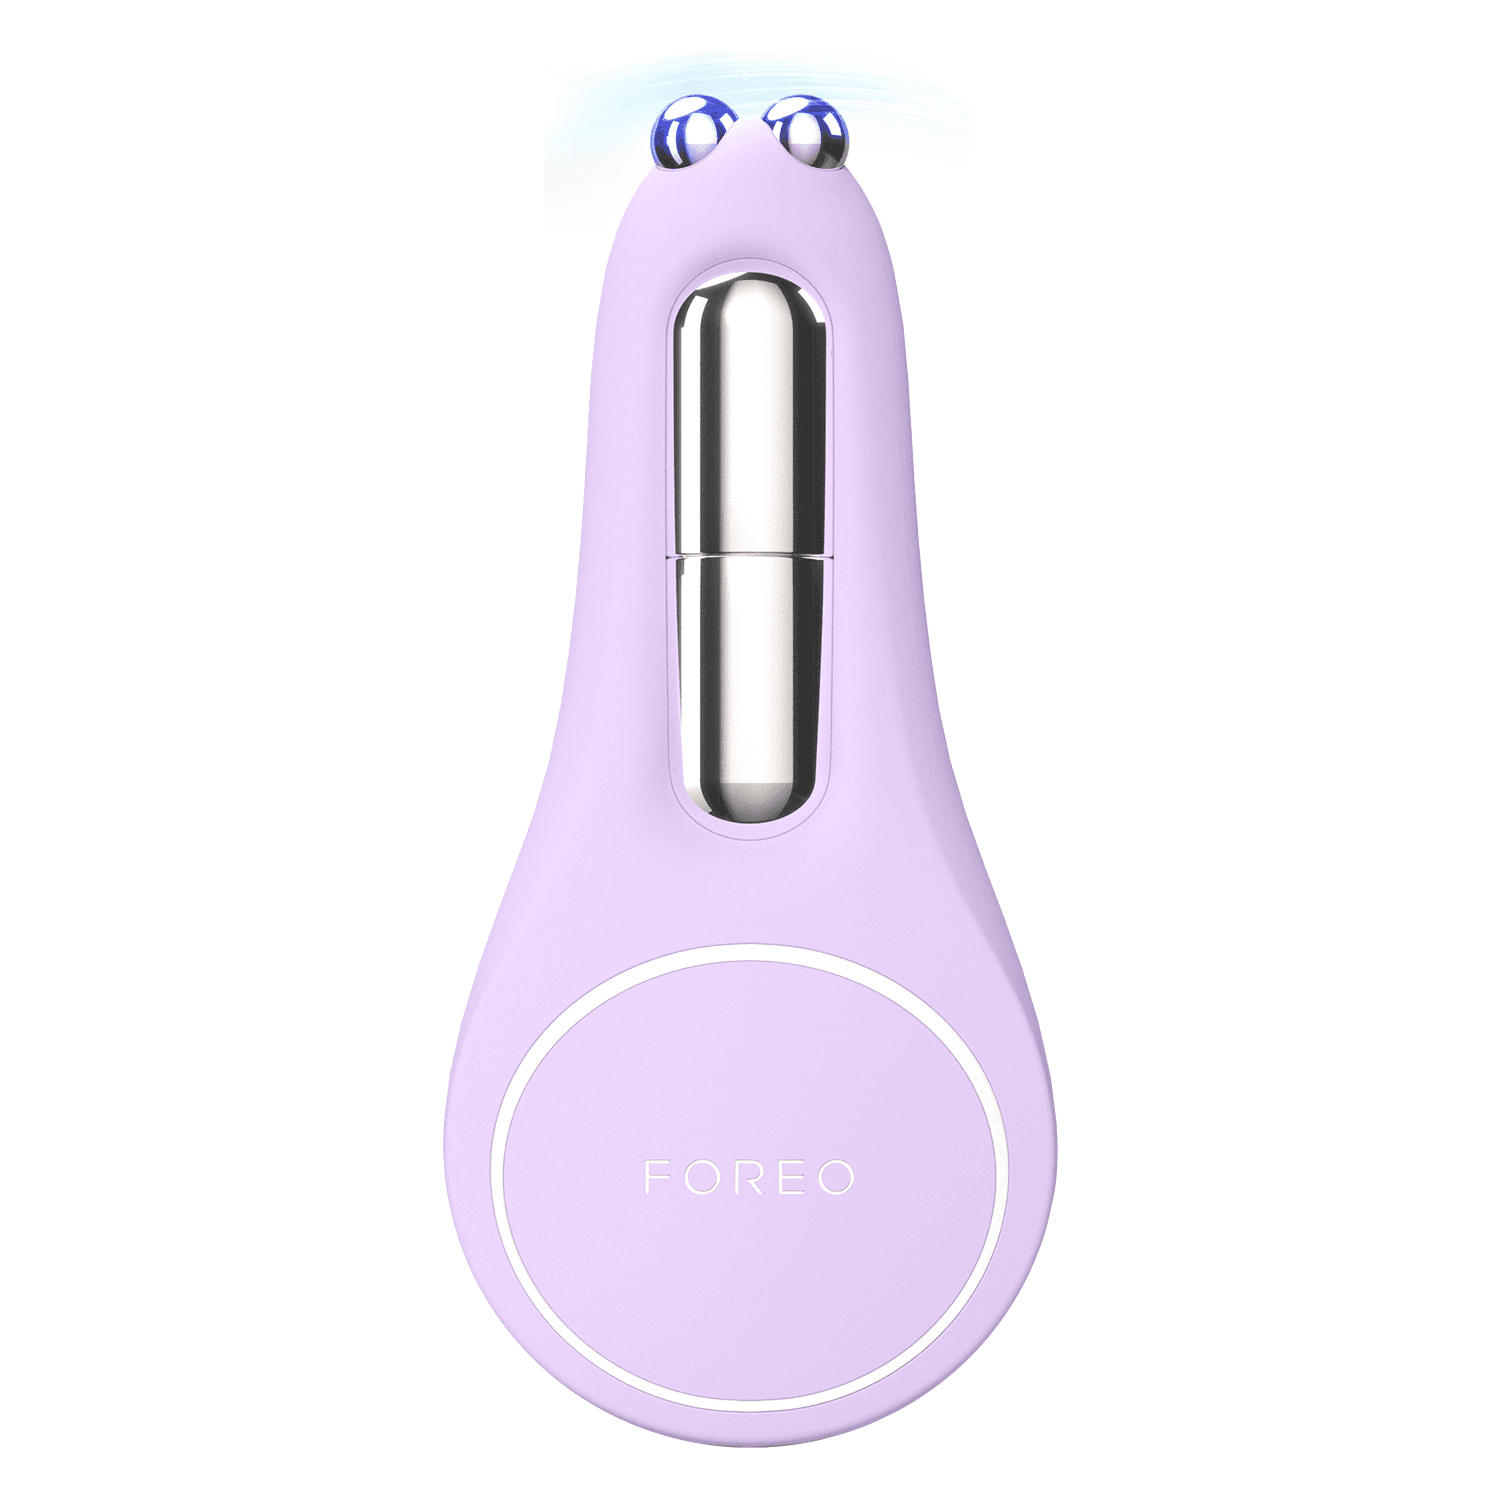 BEAR™ 2 eyes & lips - Microcurrent Line Smoothing Device Eyes & Lips Lavender